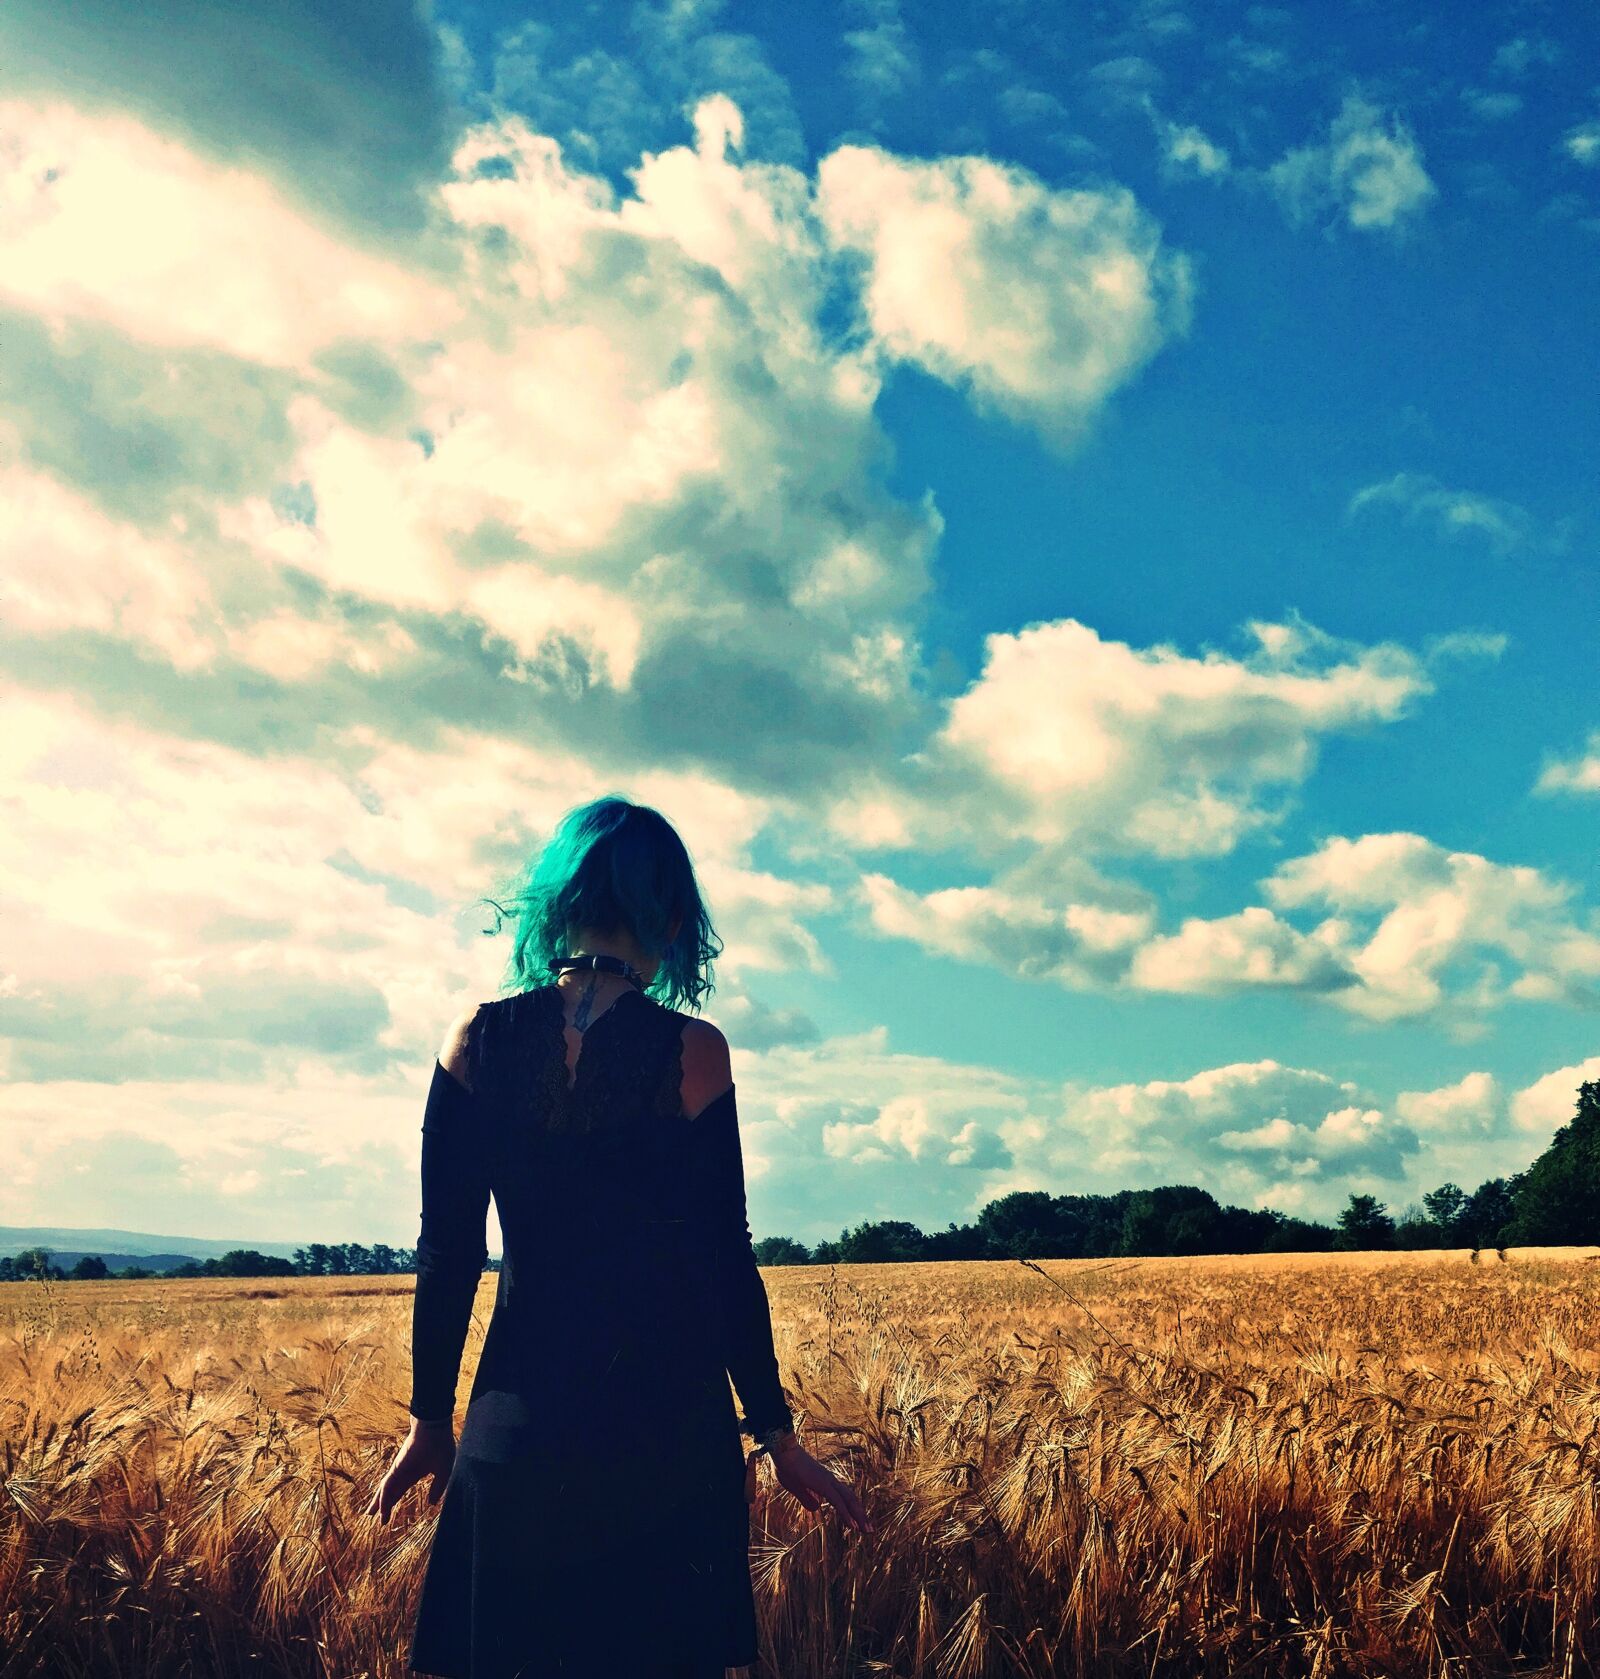 OnePlus A3003 sample photo. Blue hair, girl, field photography